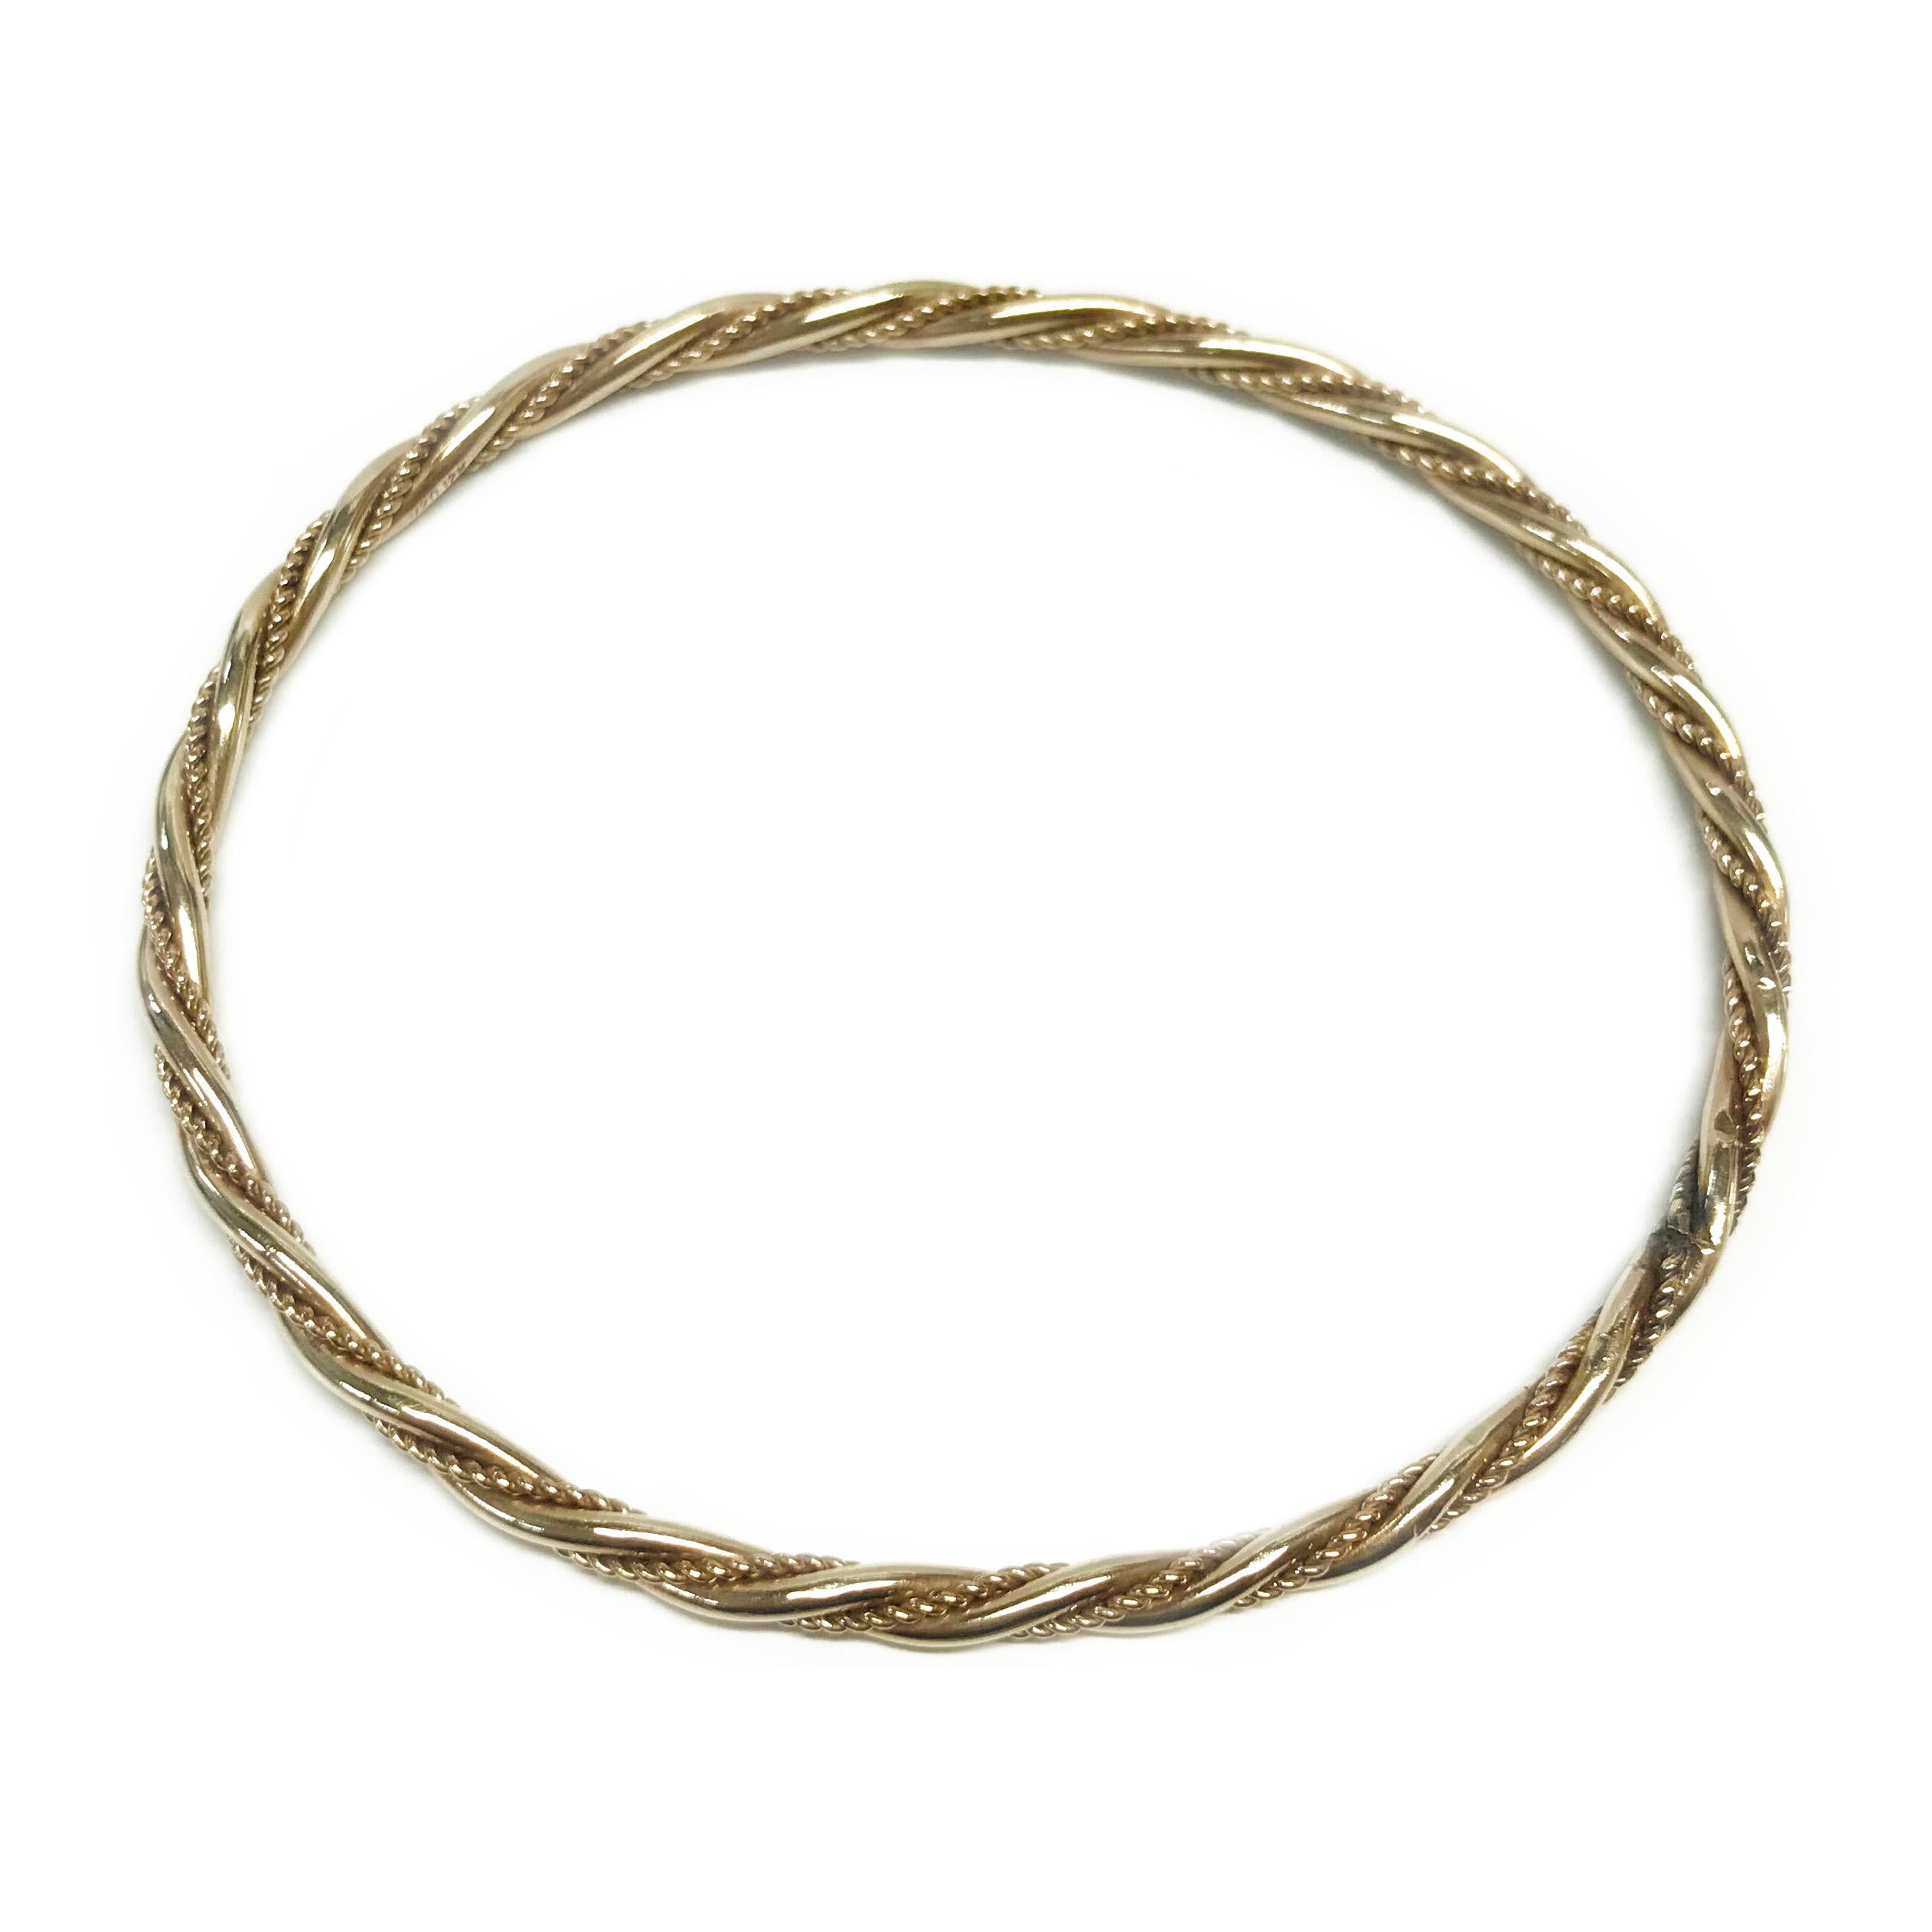 14 Karat Yellow Gold Semi-Oval Twisted Bangle. The bangle consists of two tubes twisted together, one smooth finish, and one rope-style texture. The bangle measures 2 7/8